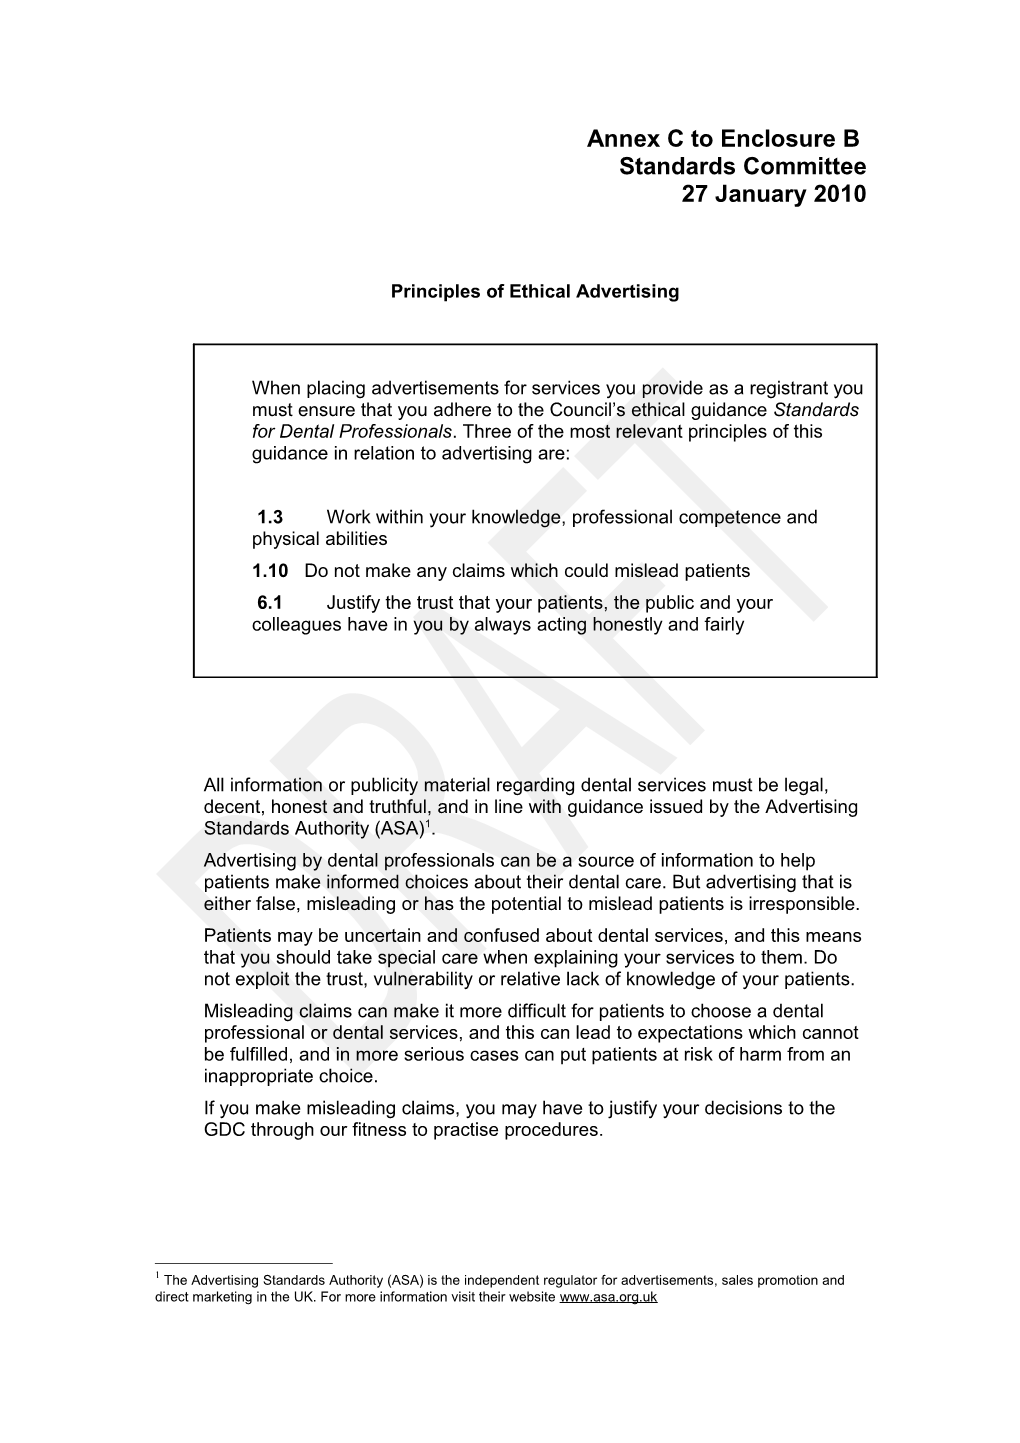 Principles of Ethical Advertising